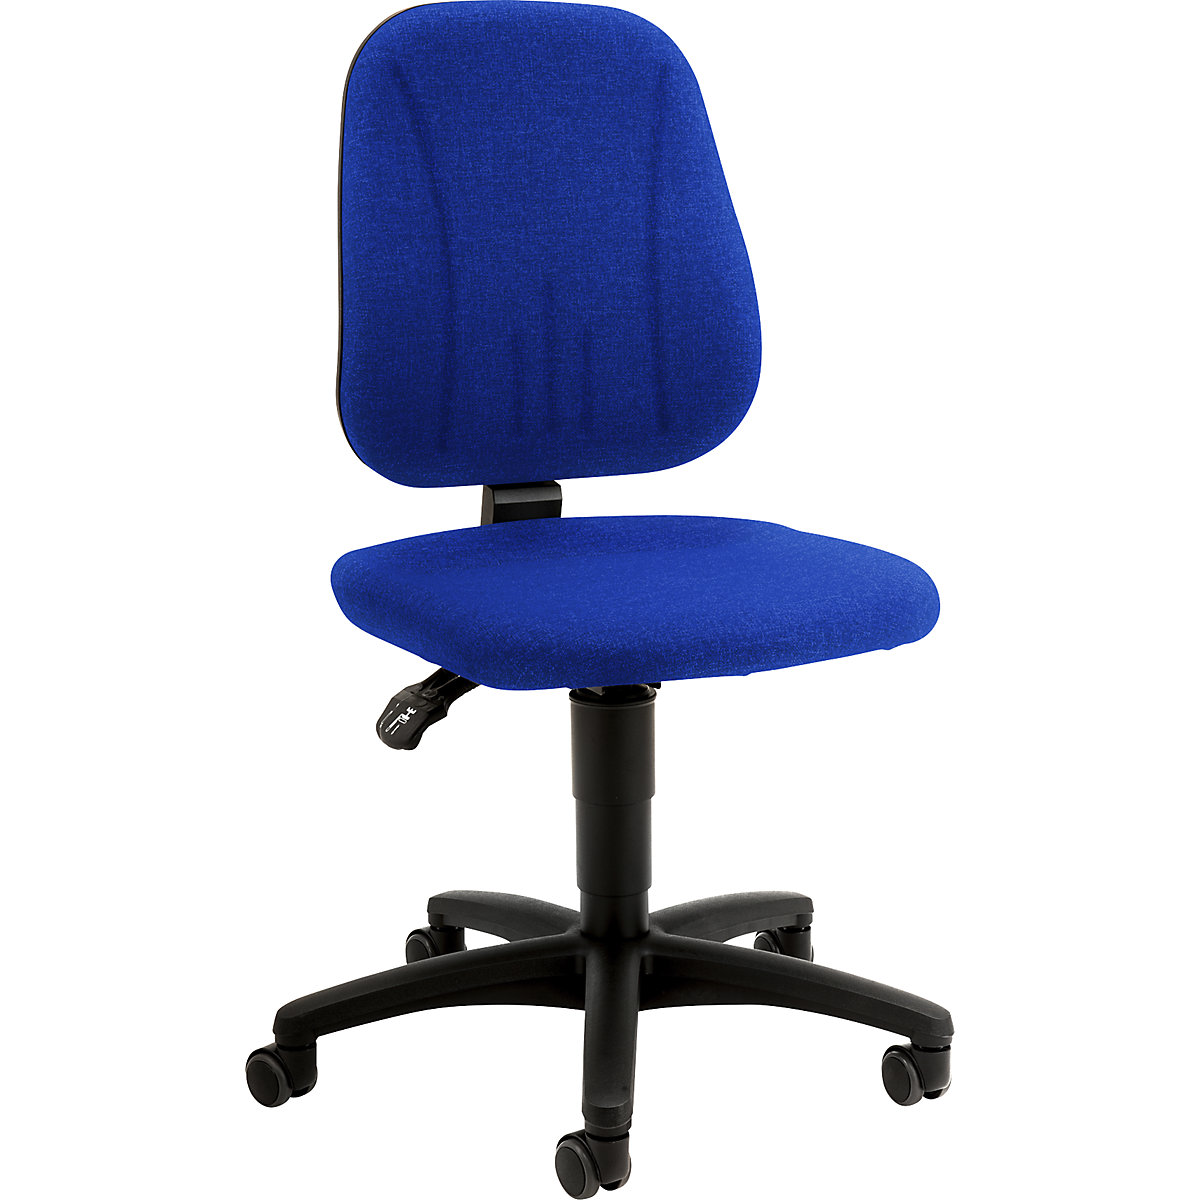 Industrial swivel chair – bimos, with gas lift height adjustment, fabric cover, blue, with castors-2